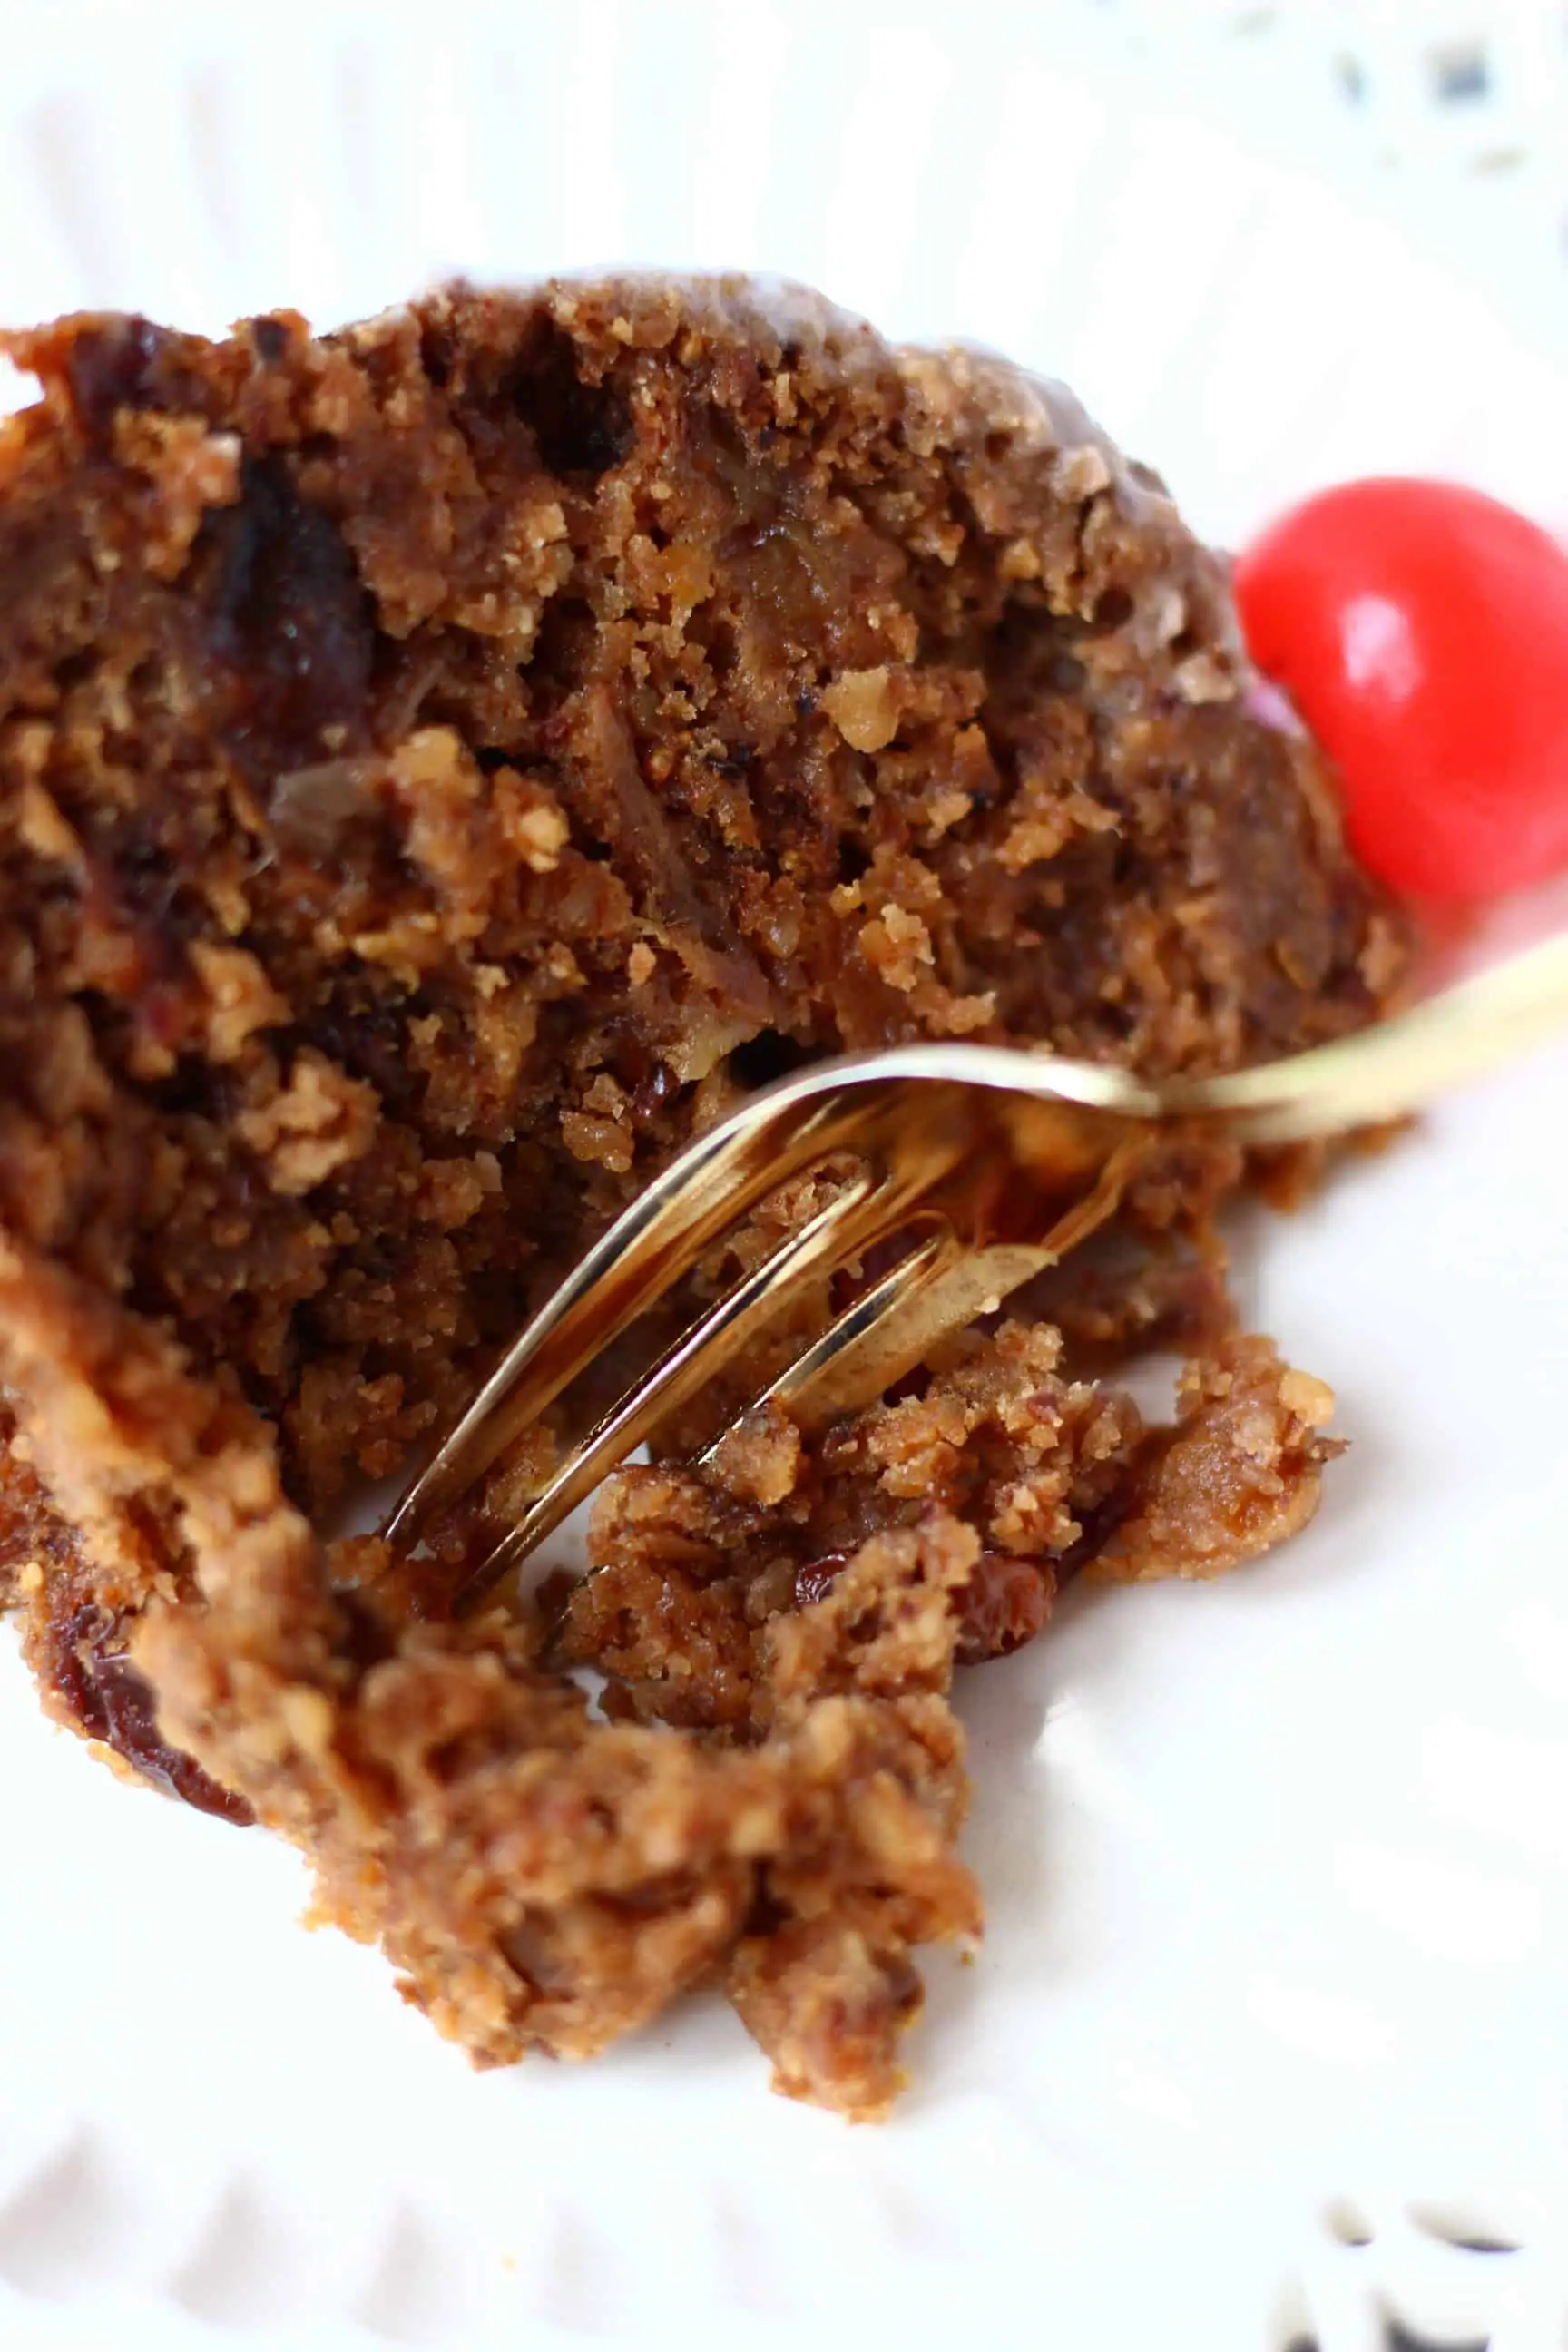 A slice of gluten-free vegan Christmas pudding on a plate with a mouthful being taken with a fork